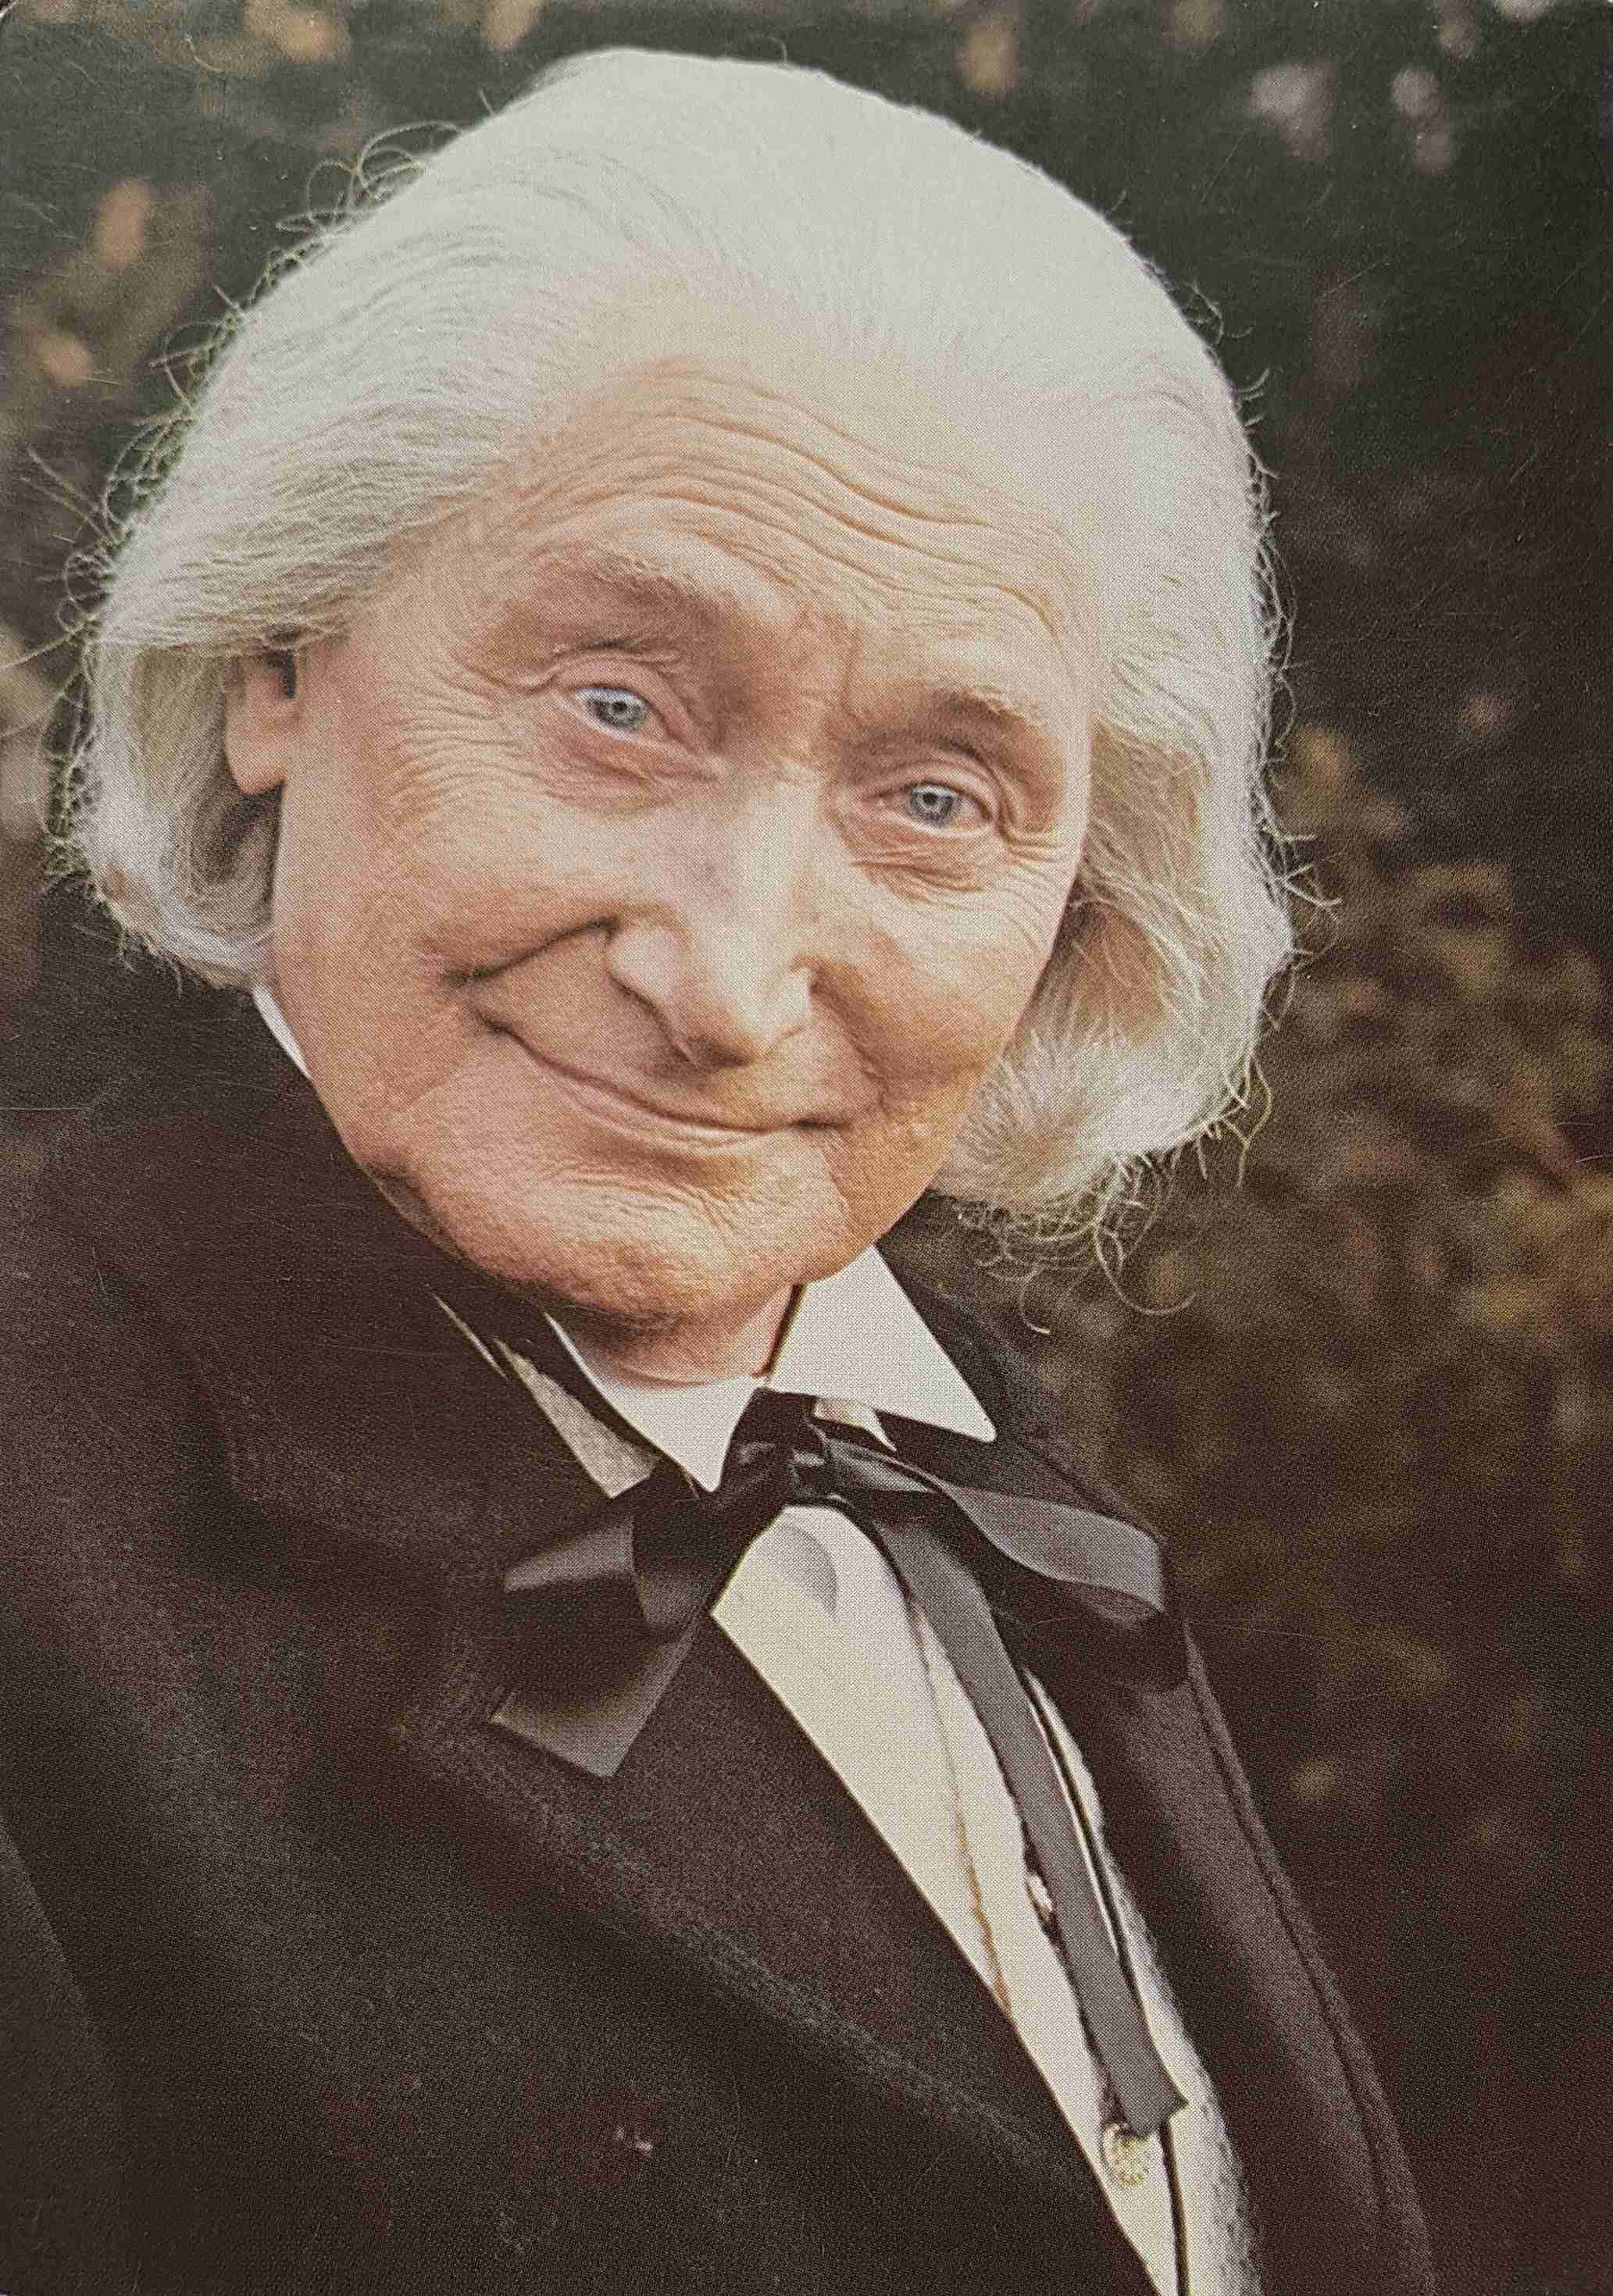 Picture of Doctor Who - Richard Hurndall by artist Unknown from the BBC postcards - Records and Tapes library